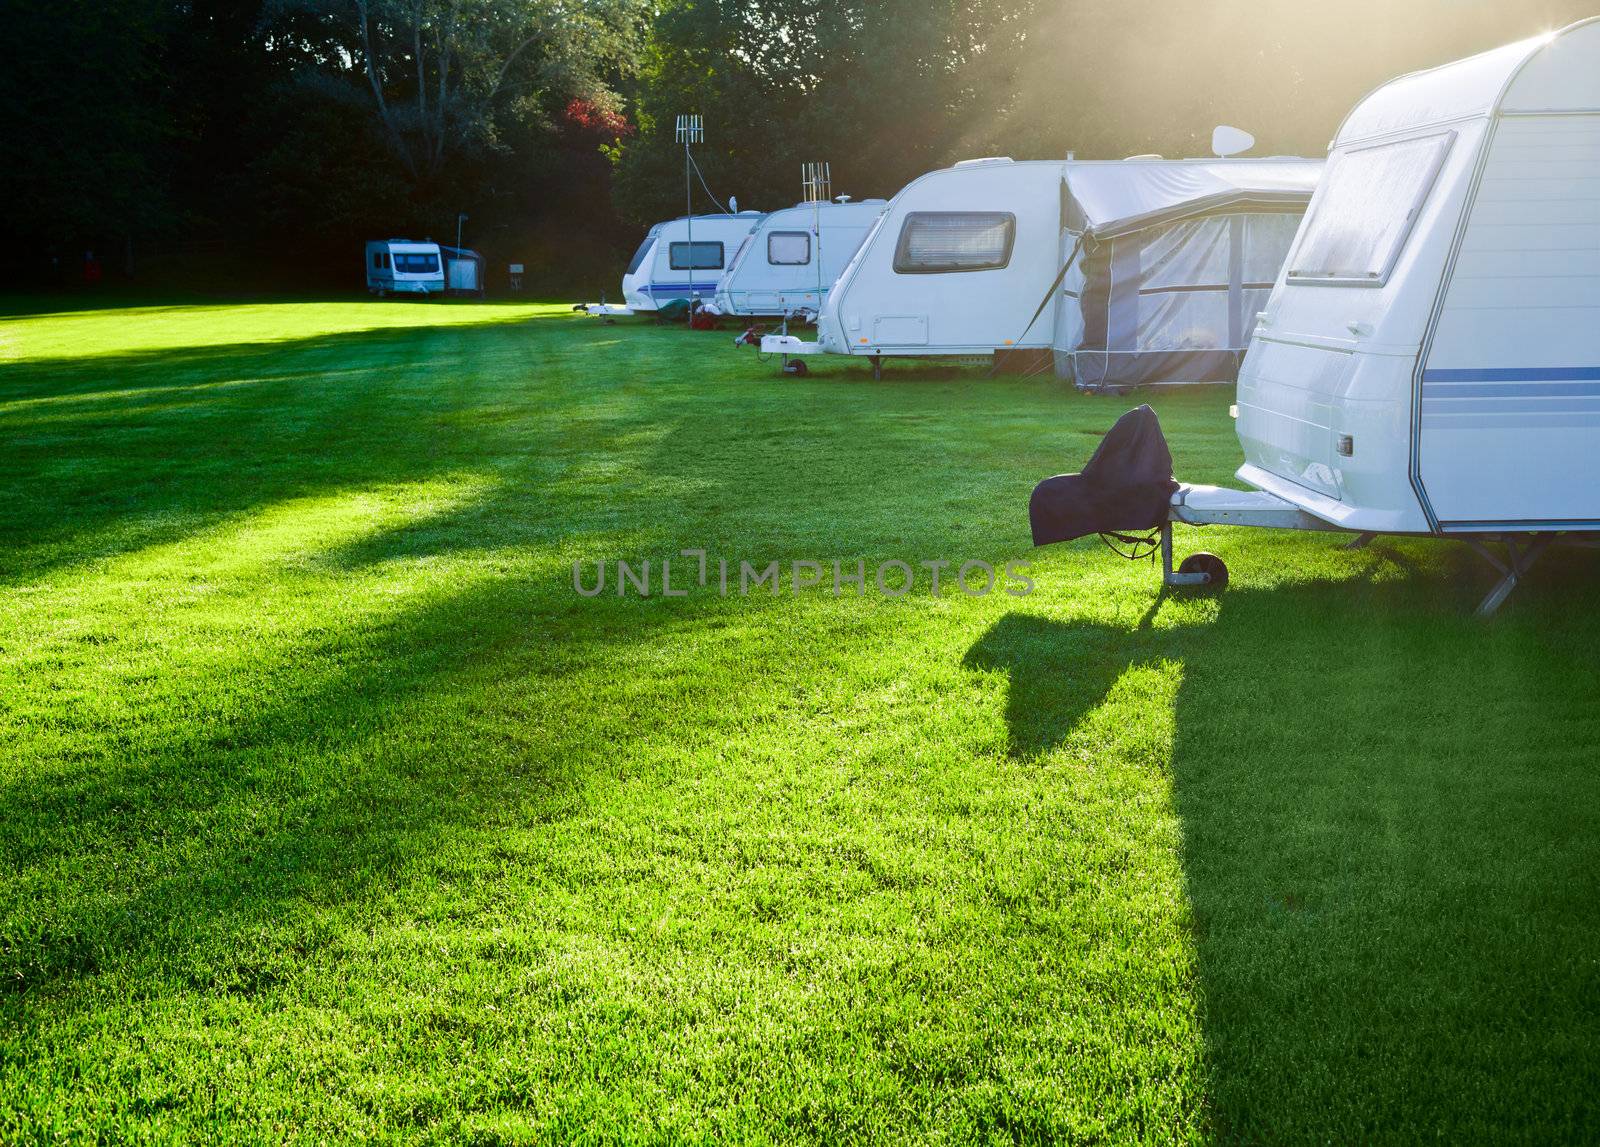 Campsite with caravans in a morning light